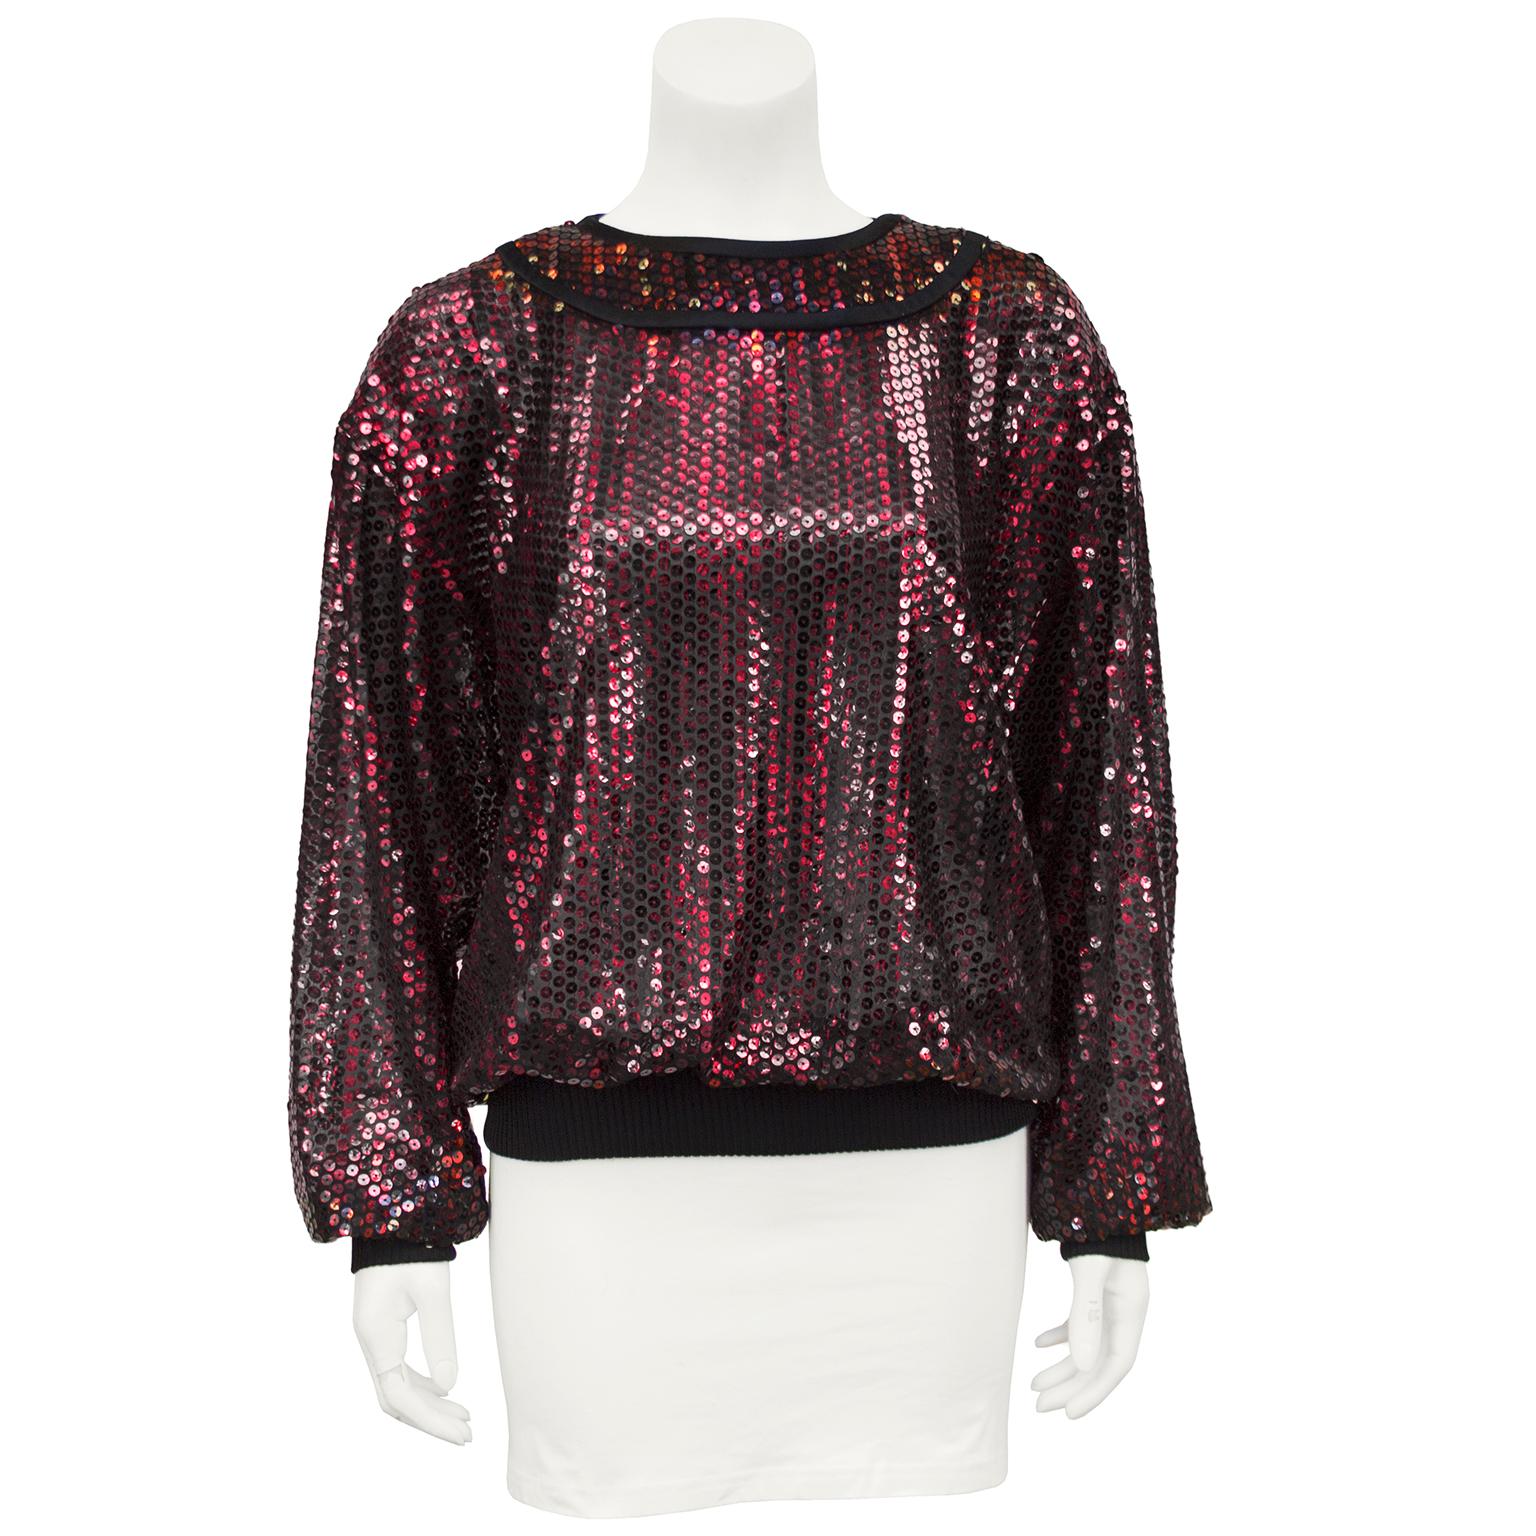 Emanuel Ungaro 1970s red sequin top with black ribbing at the cuffs and hem. The fit is blouson, almost sweatshirt style, with a black stain trimmed yoke at the neckline and 3 black faceted buttons on the top of the let shoulder. The res iridescent